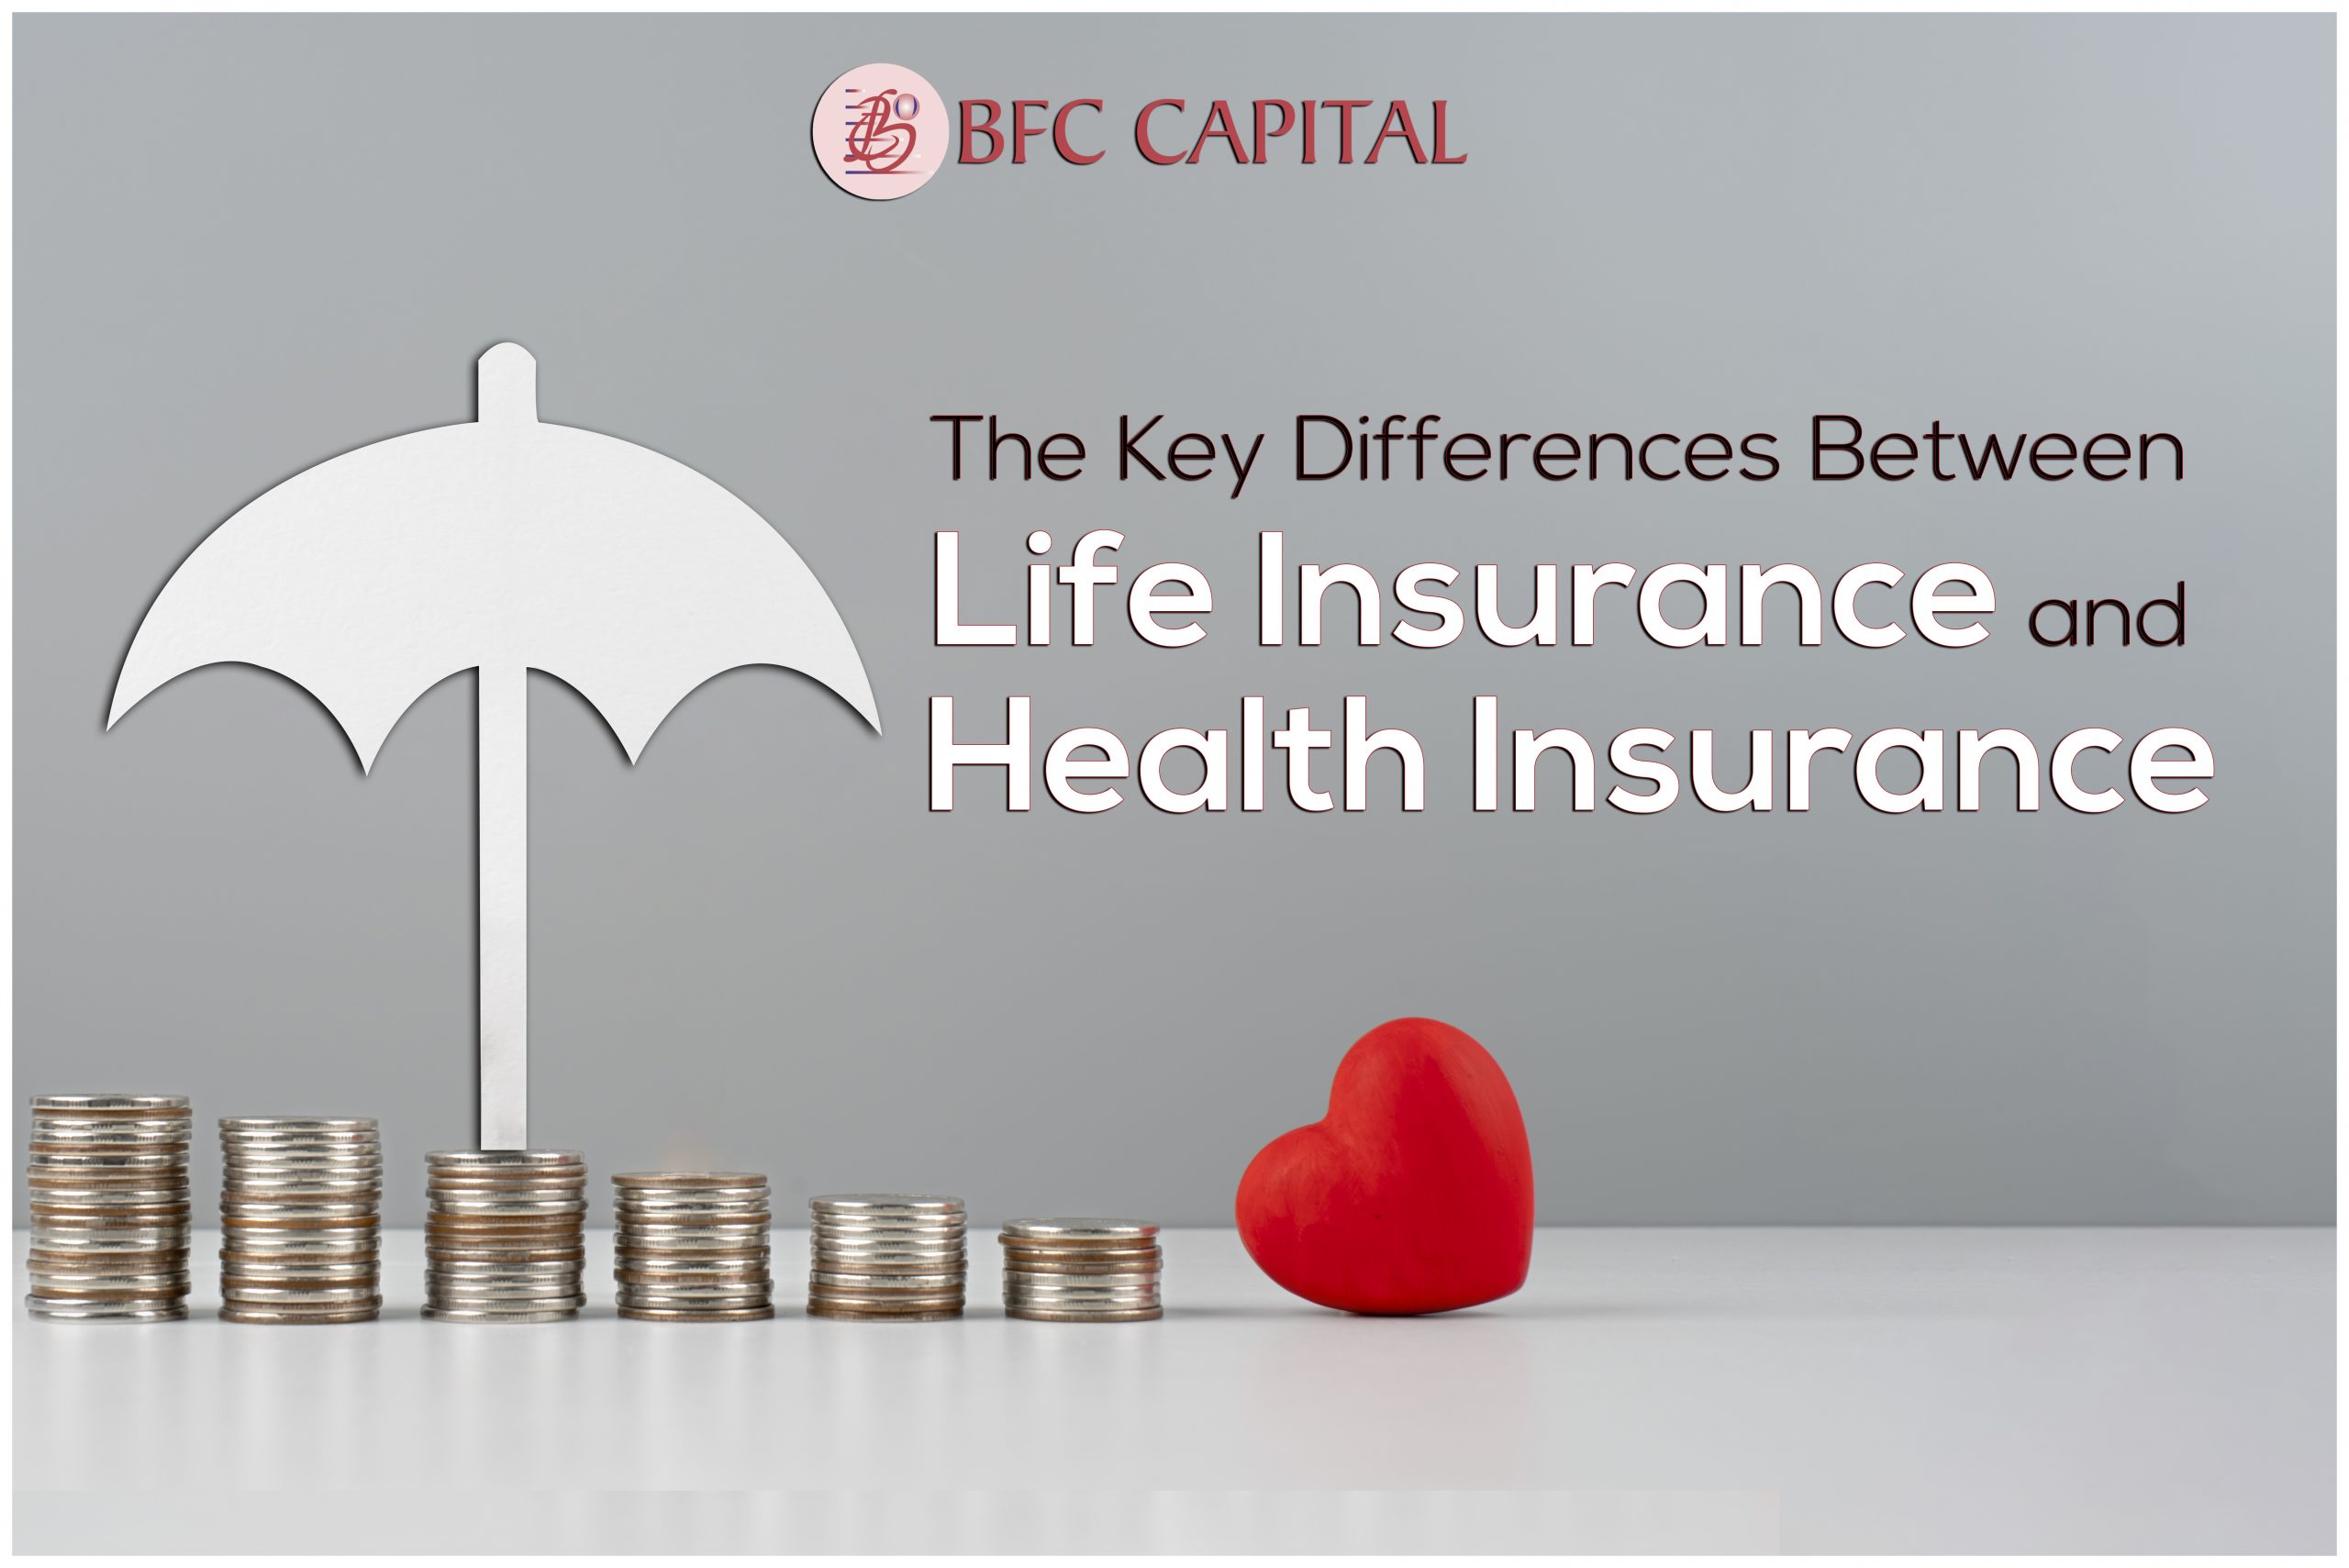 The Key Differences Between Life Insurance and Health Insurance